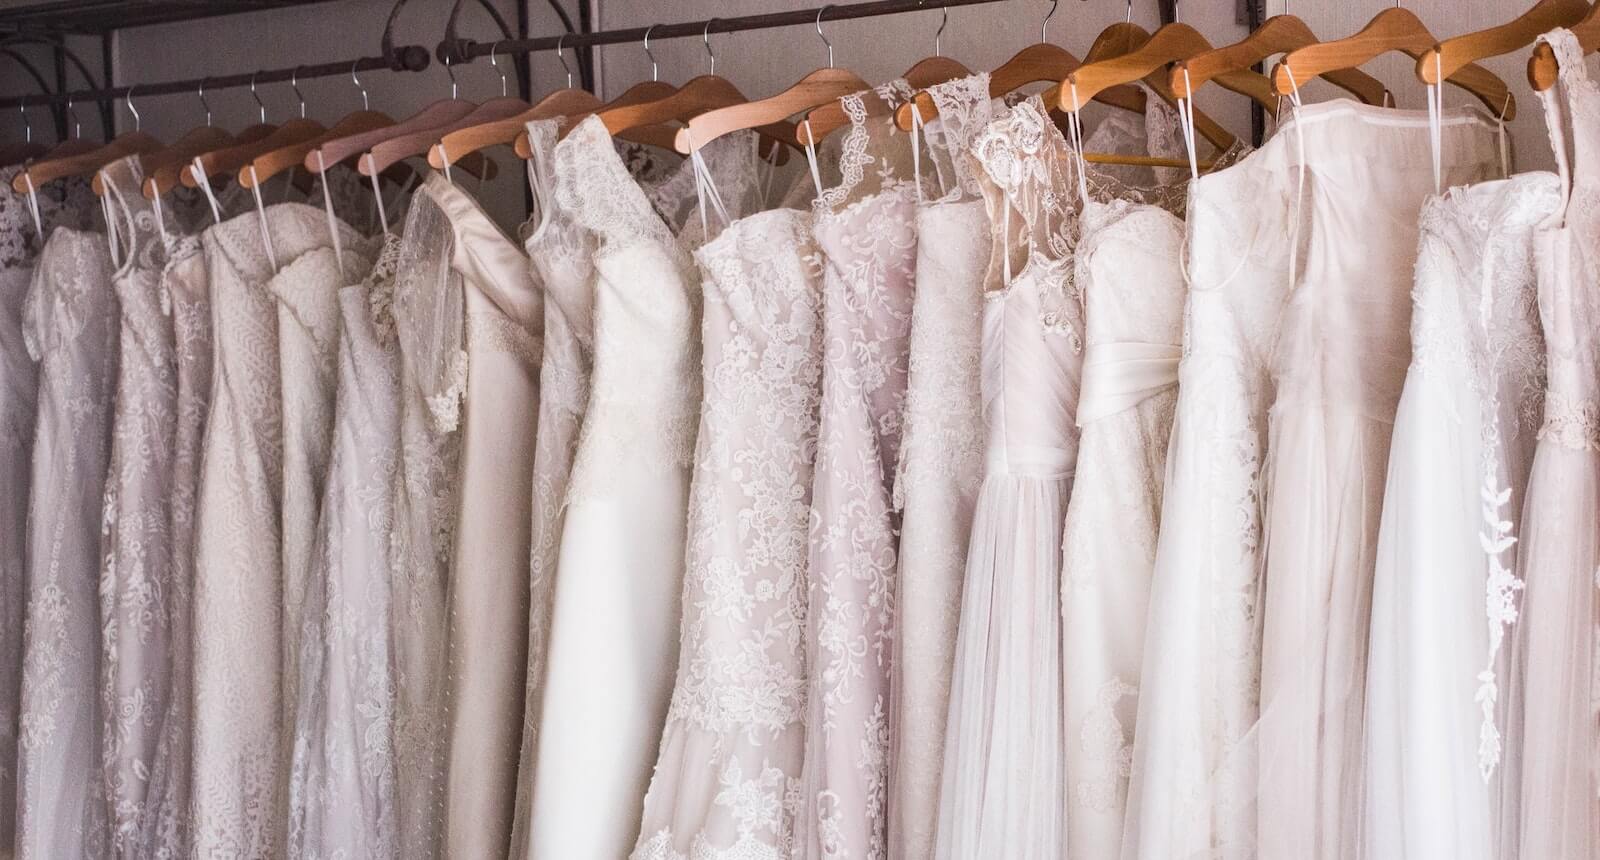 A Guide to Dress Shopping with Your Future Spouse